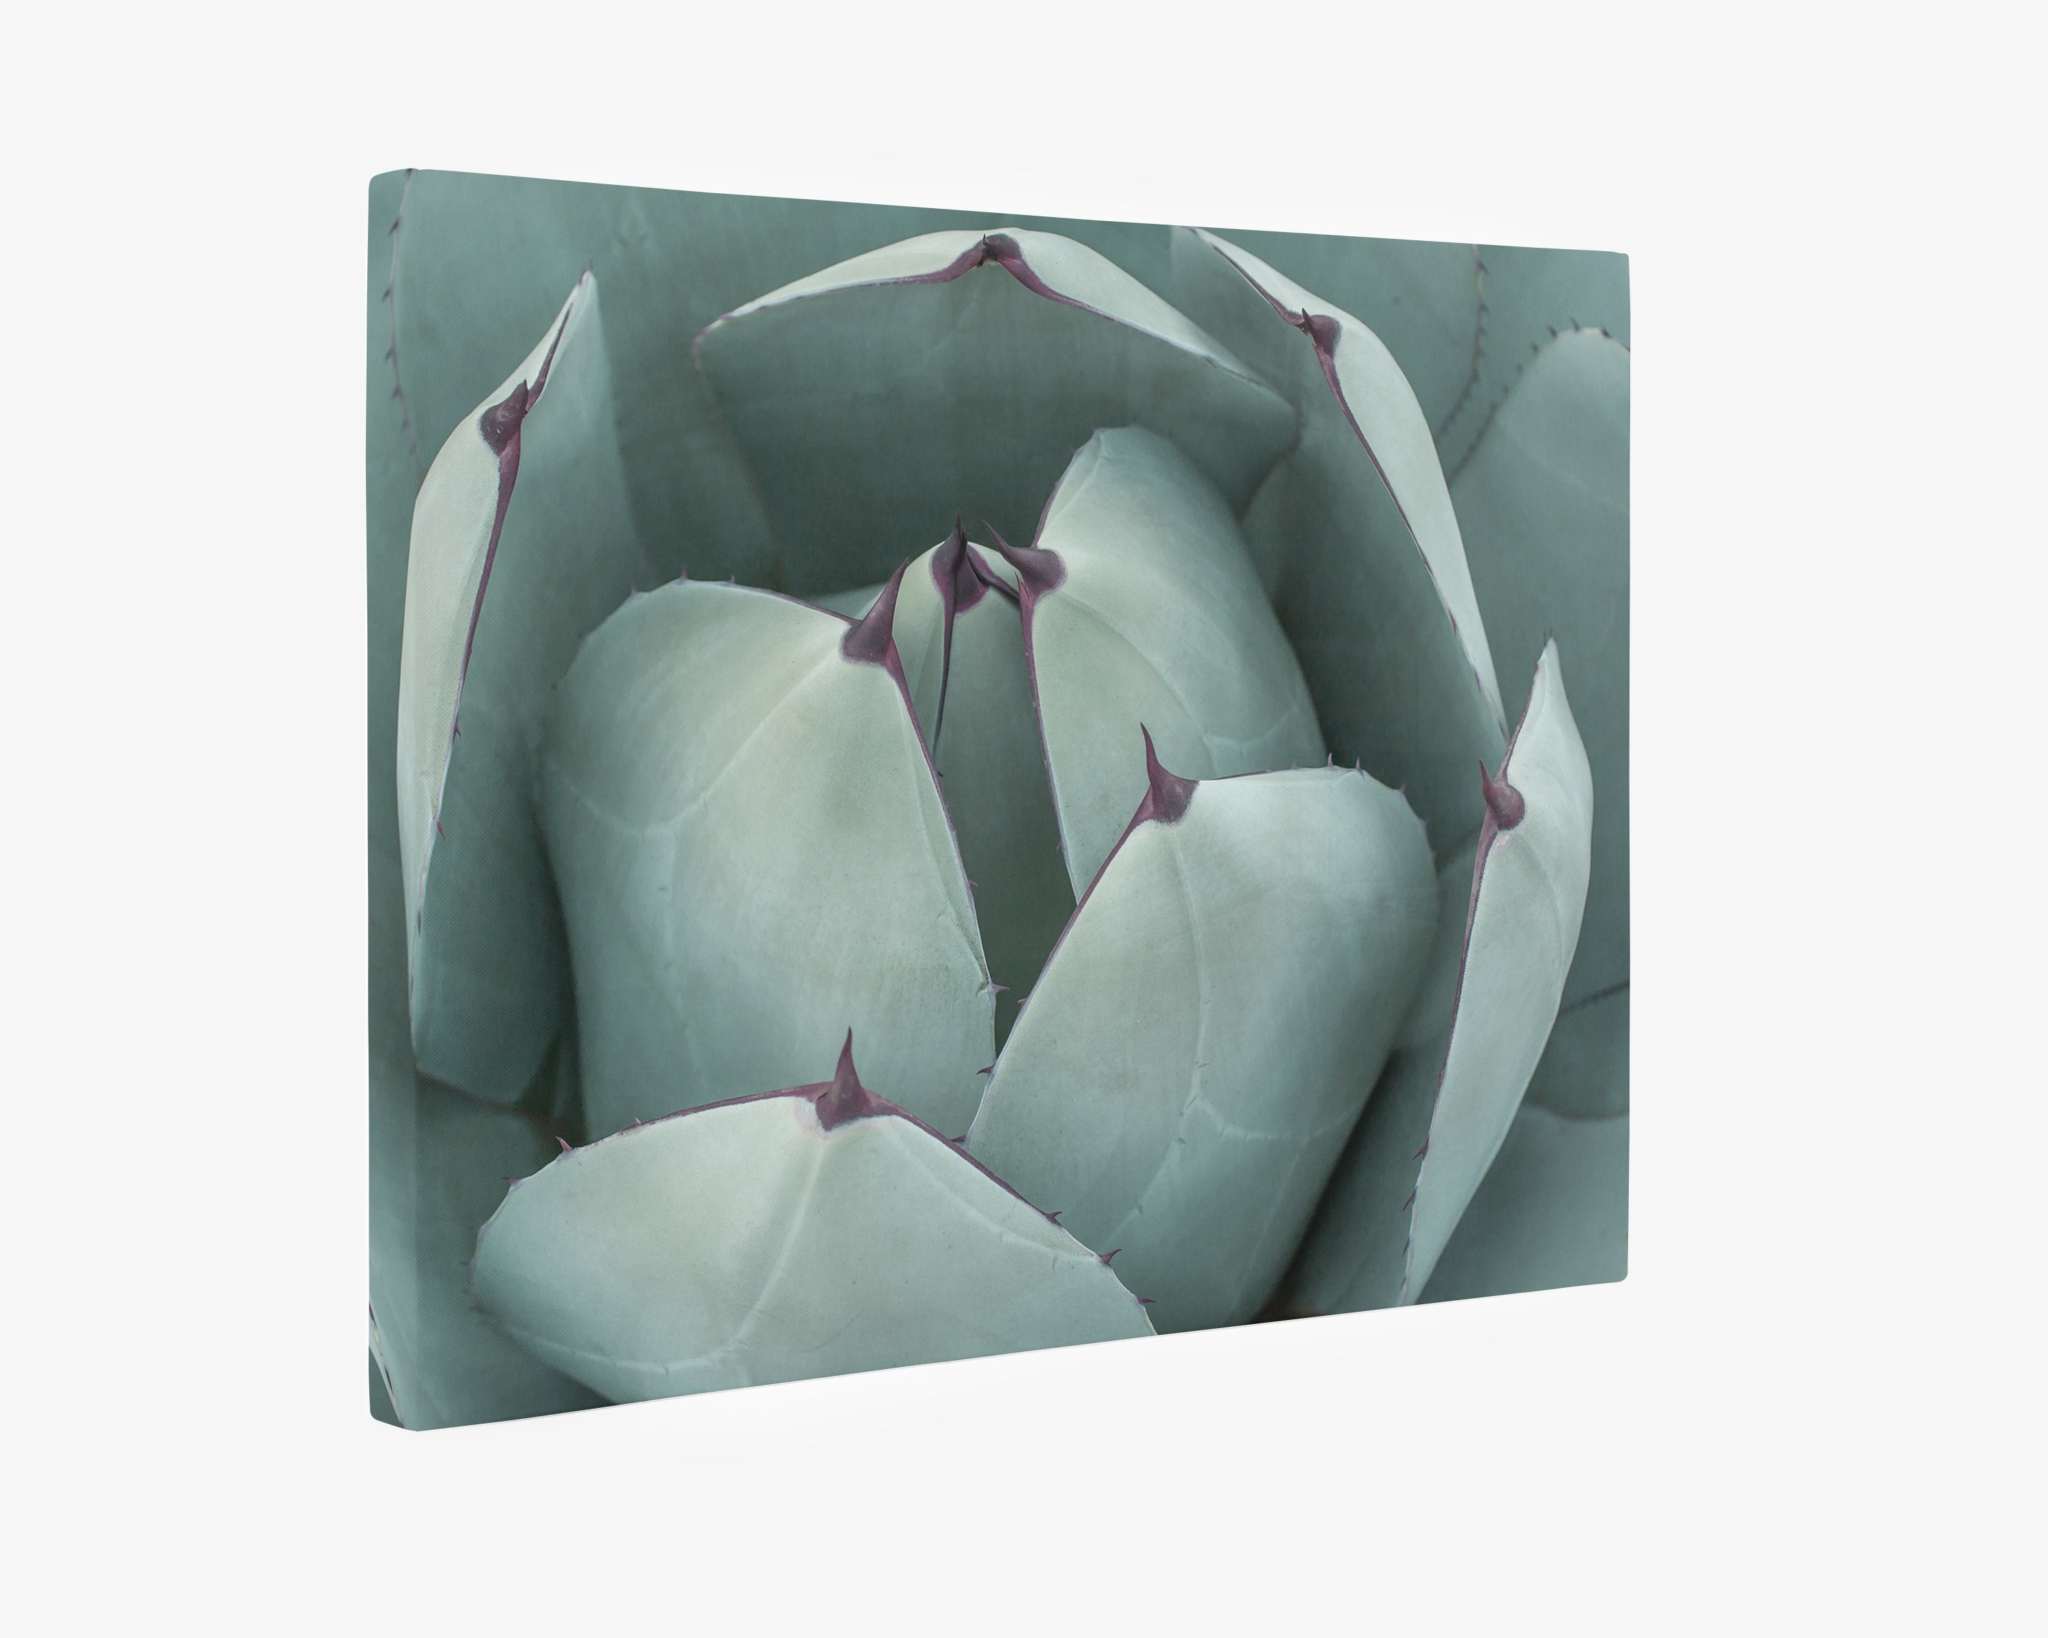 Photograph of a close-up view of a succulent plant with thick, fleshy leaves in a geometric arrangement. The leaves are pale green with purple tips and edges featuring small spines. This desert plant artwork, 'Teal Petals,' is presented on premium artist-grade poly-cotton blend canvas gallery wrap prints by Offley Green.